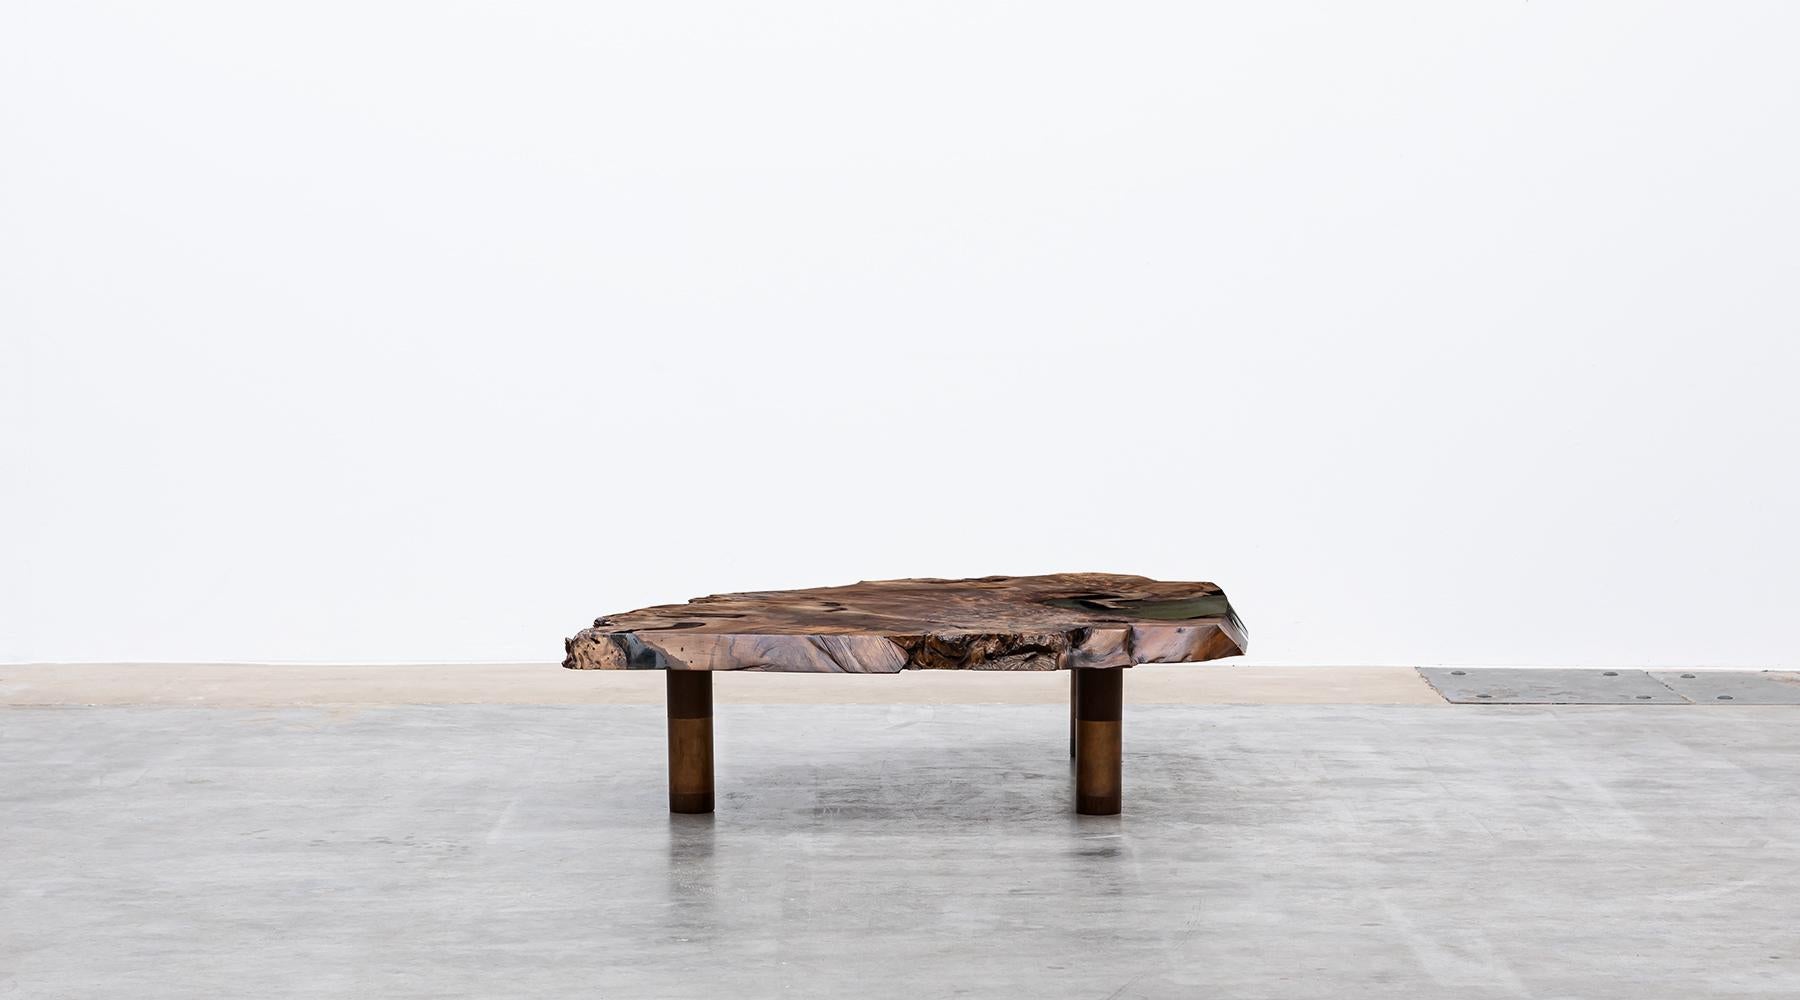 Contemporary Live Edge European Walnut Table by Johannes Hock 'D' In Excellent Condition For Sale In Frankfurt, Hessen, DE